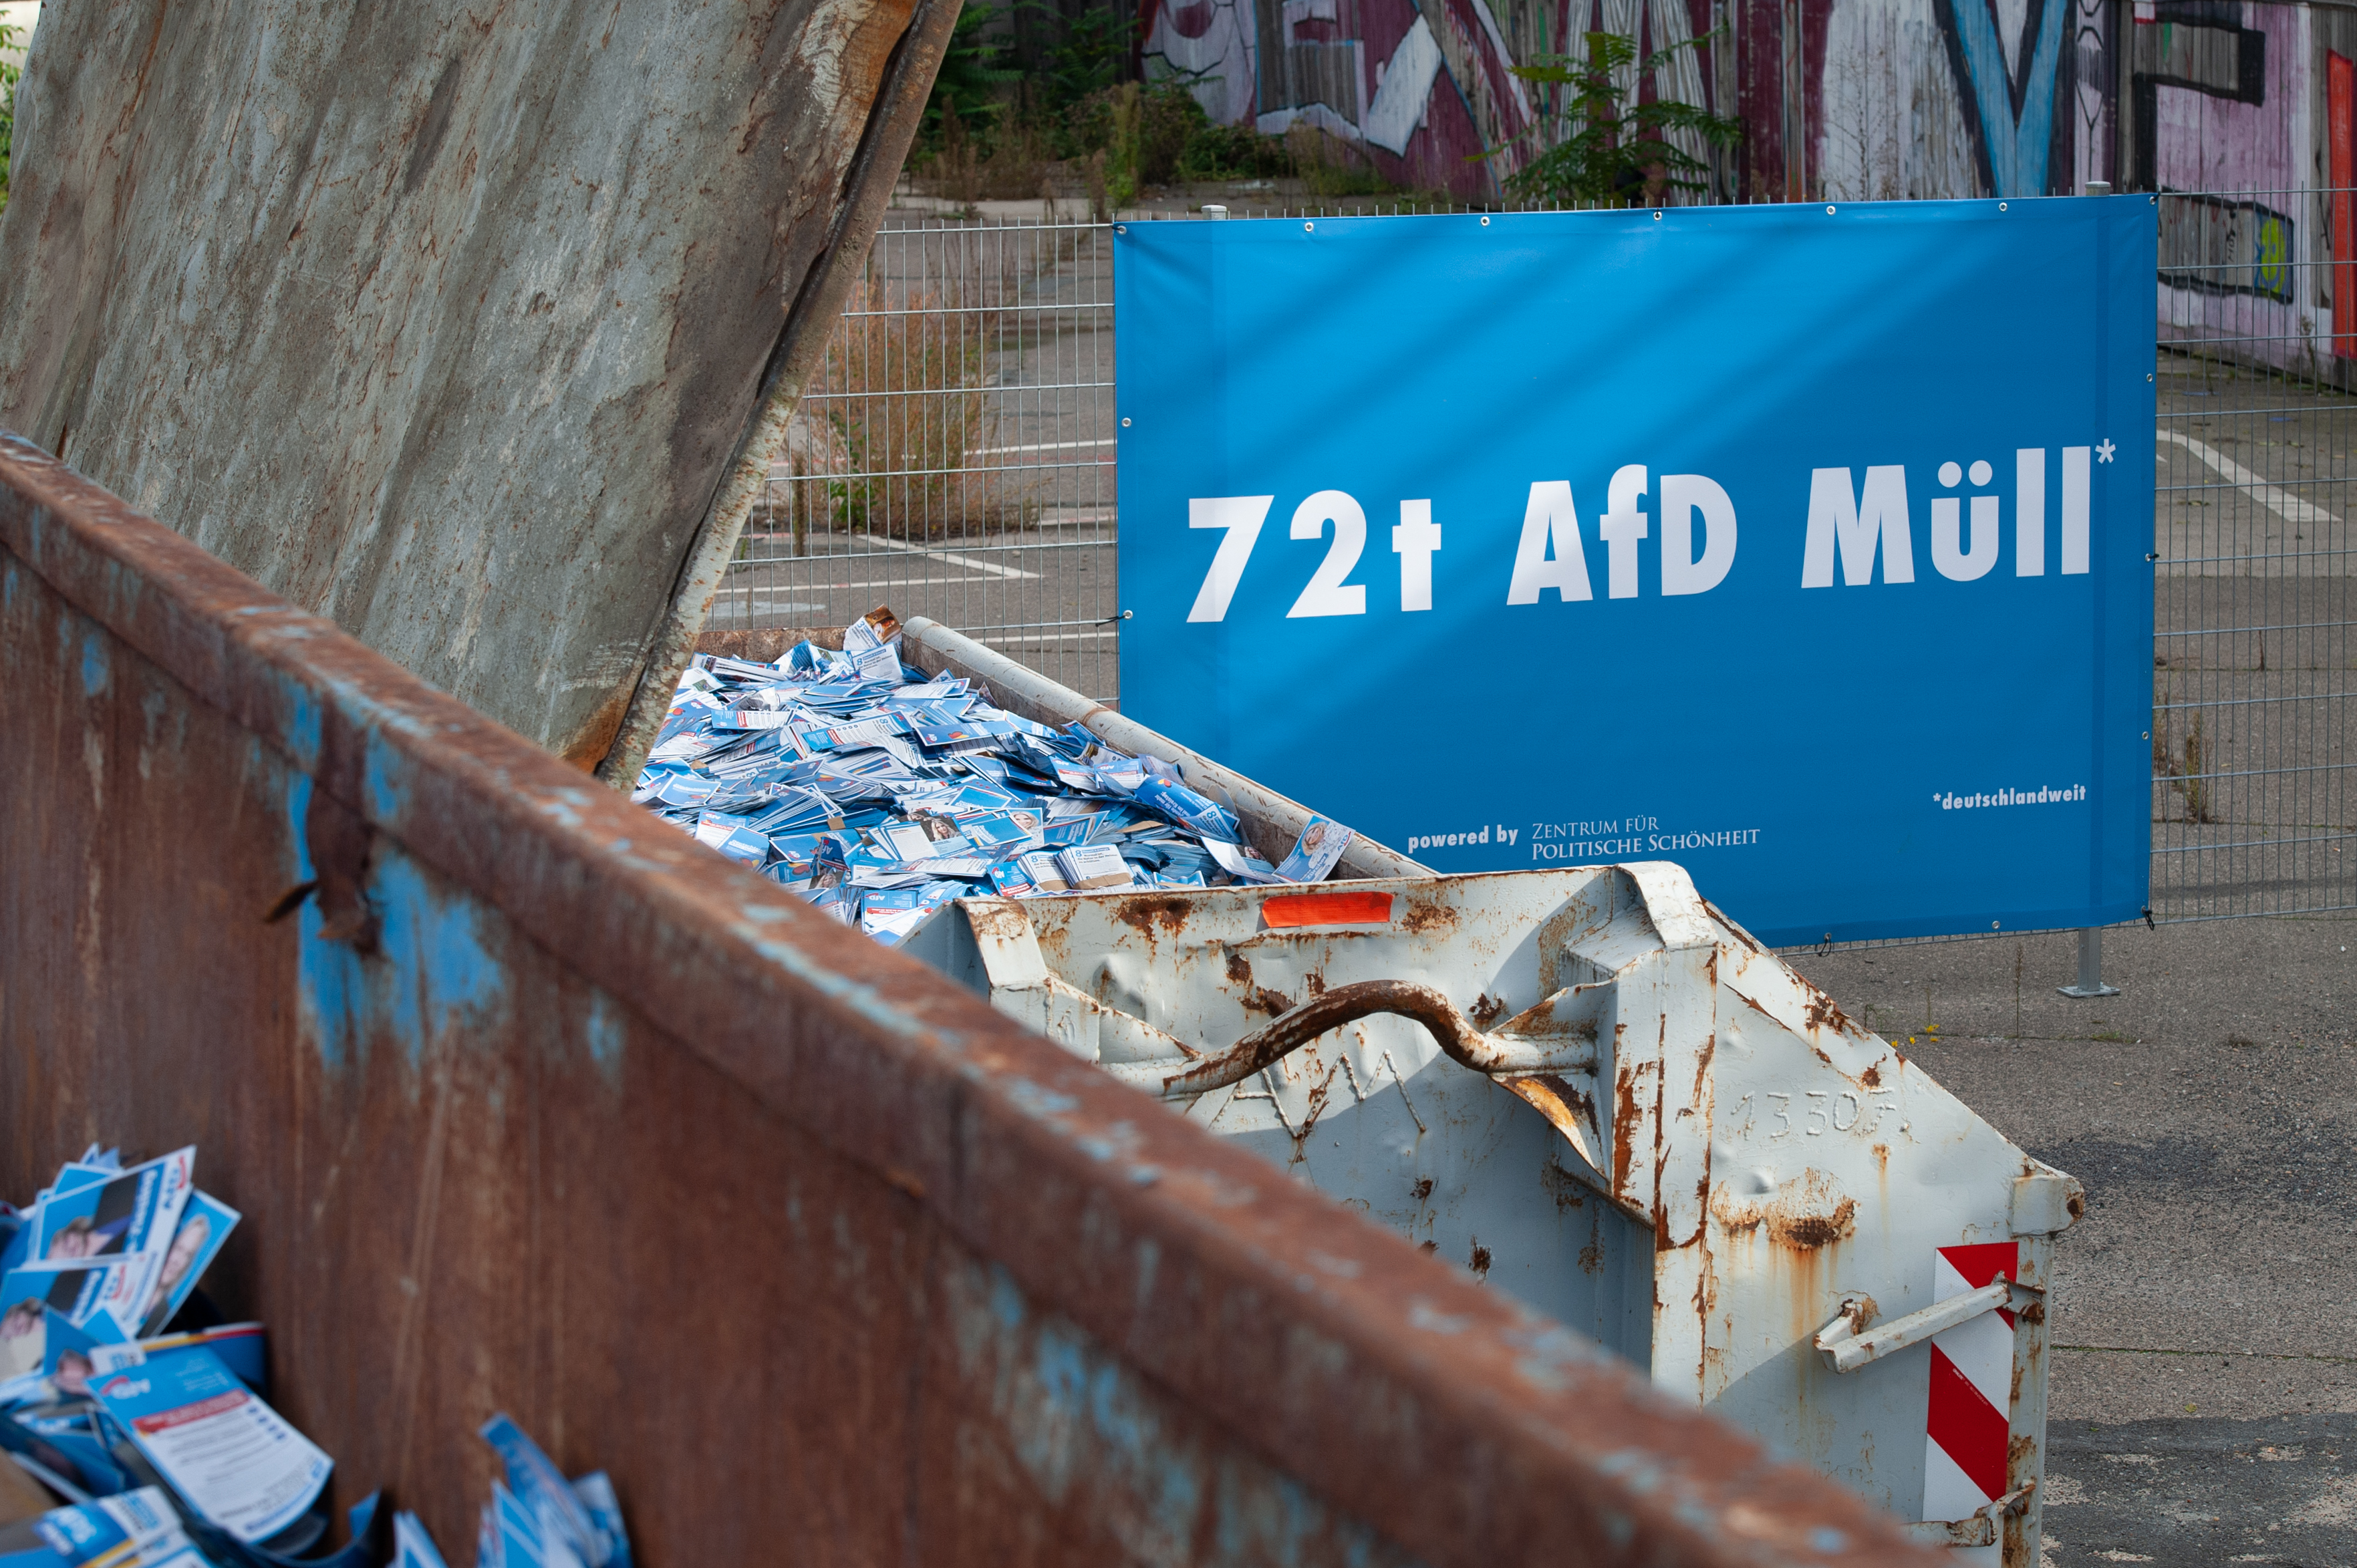 Two containers with AfD campaign flyers seen in birds perspective. In the backrgound a banner stating “72t AfD Müll powered by Zentrum für Politische Schönheit”, meaning “72 tons of AfD-trash“.